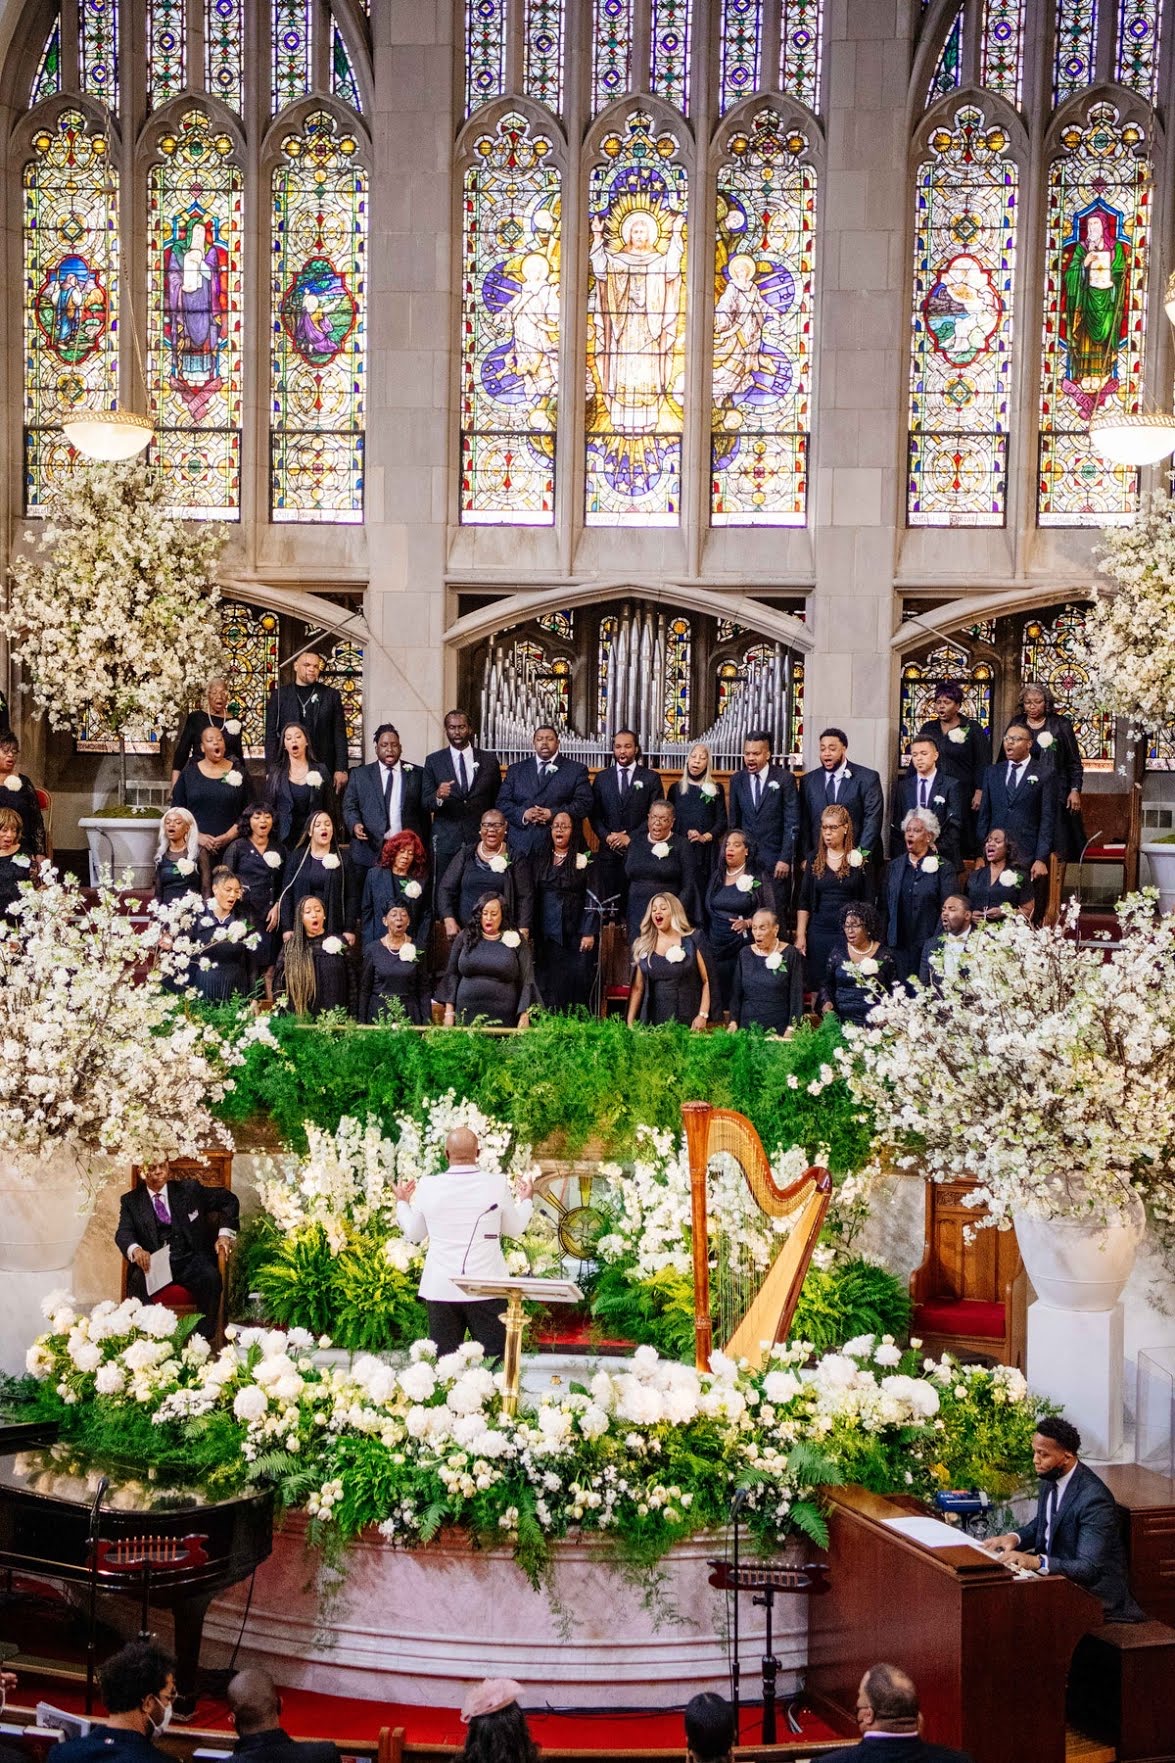 André Leon Talley's Memorial Service on Friday, April 29, 2022 at the icon's longtime house of worship, The Abyssinian Baptist Church in Harlem